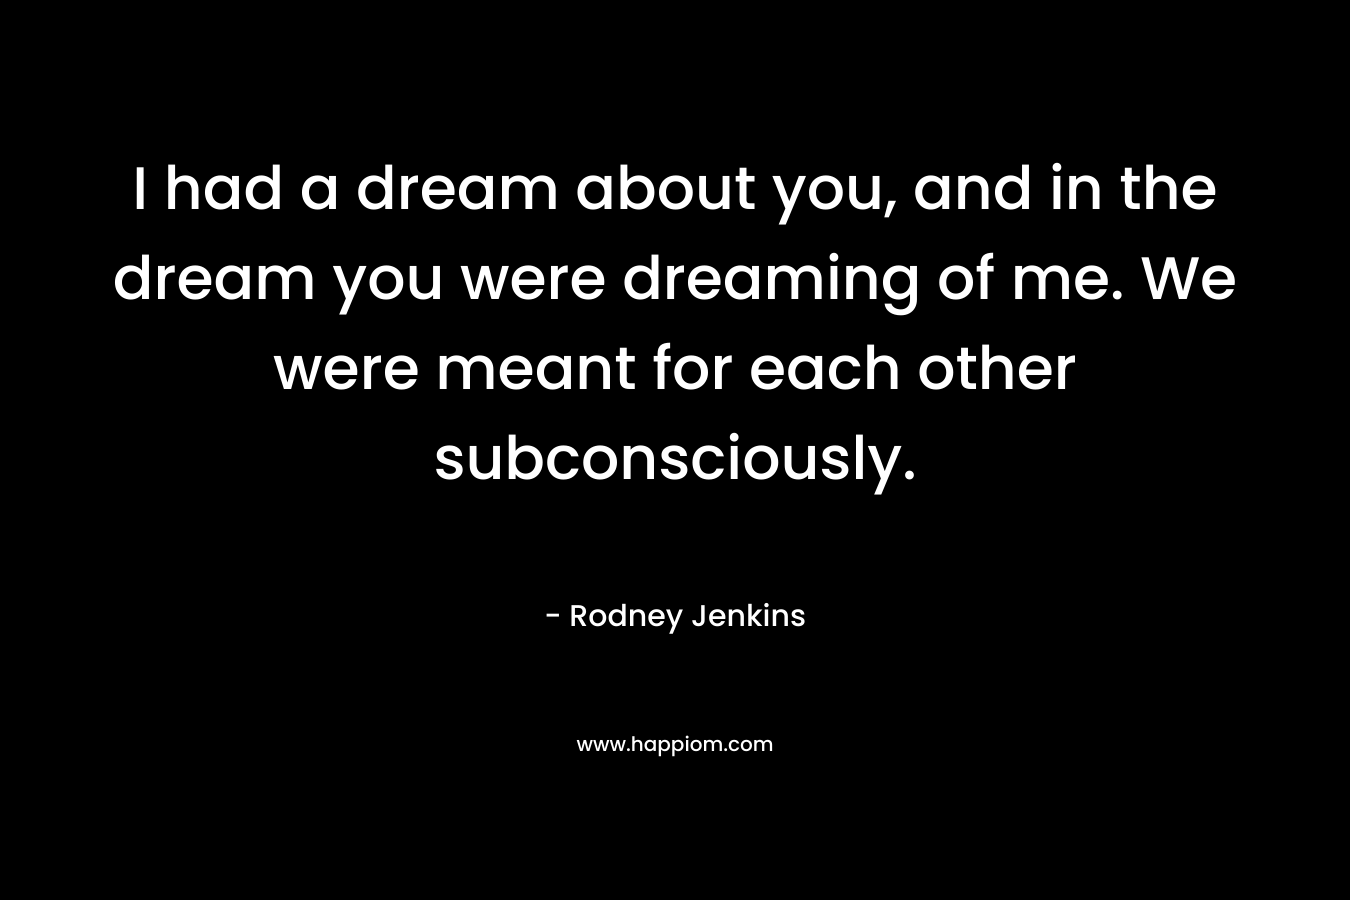 I had a dream about you, and in the dream you were dreaming of me. We were meant for each other subconsciously.